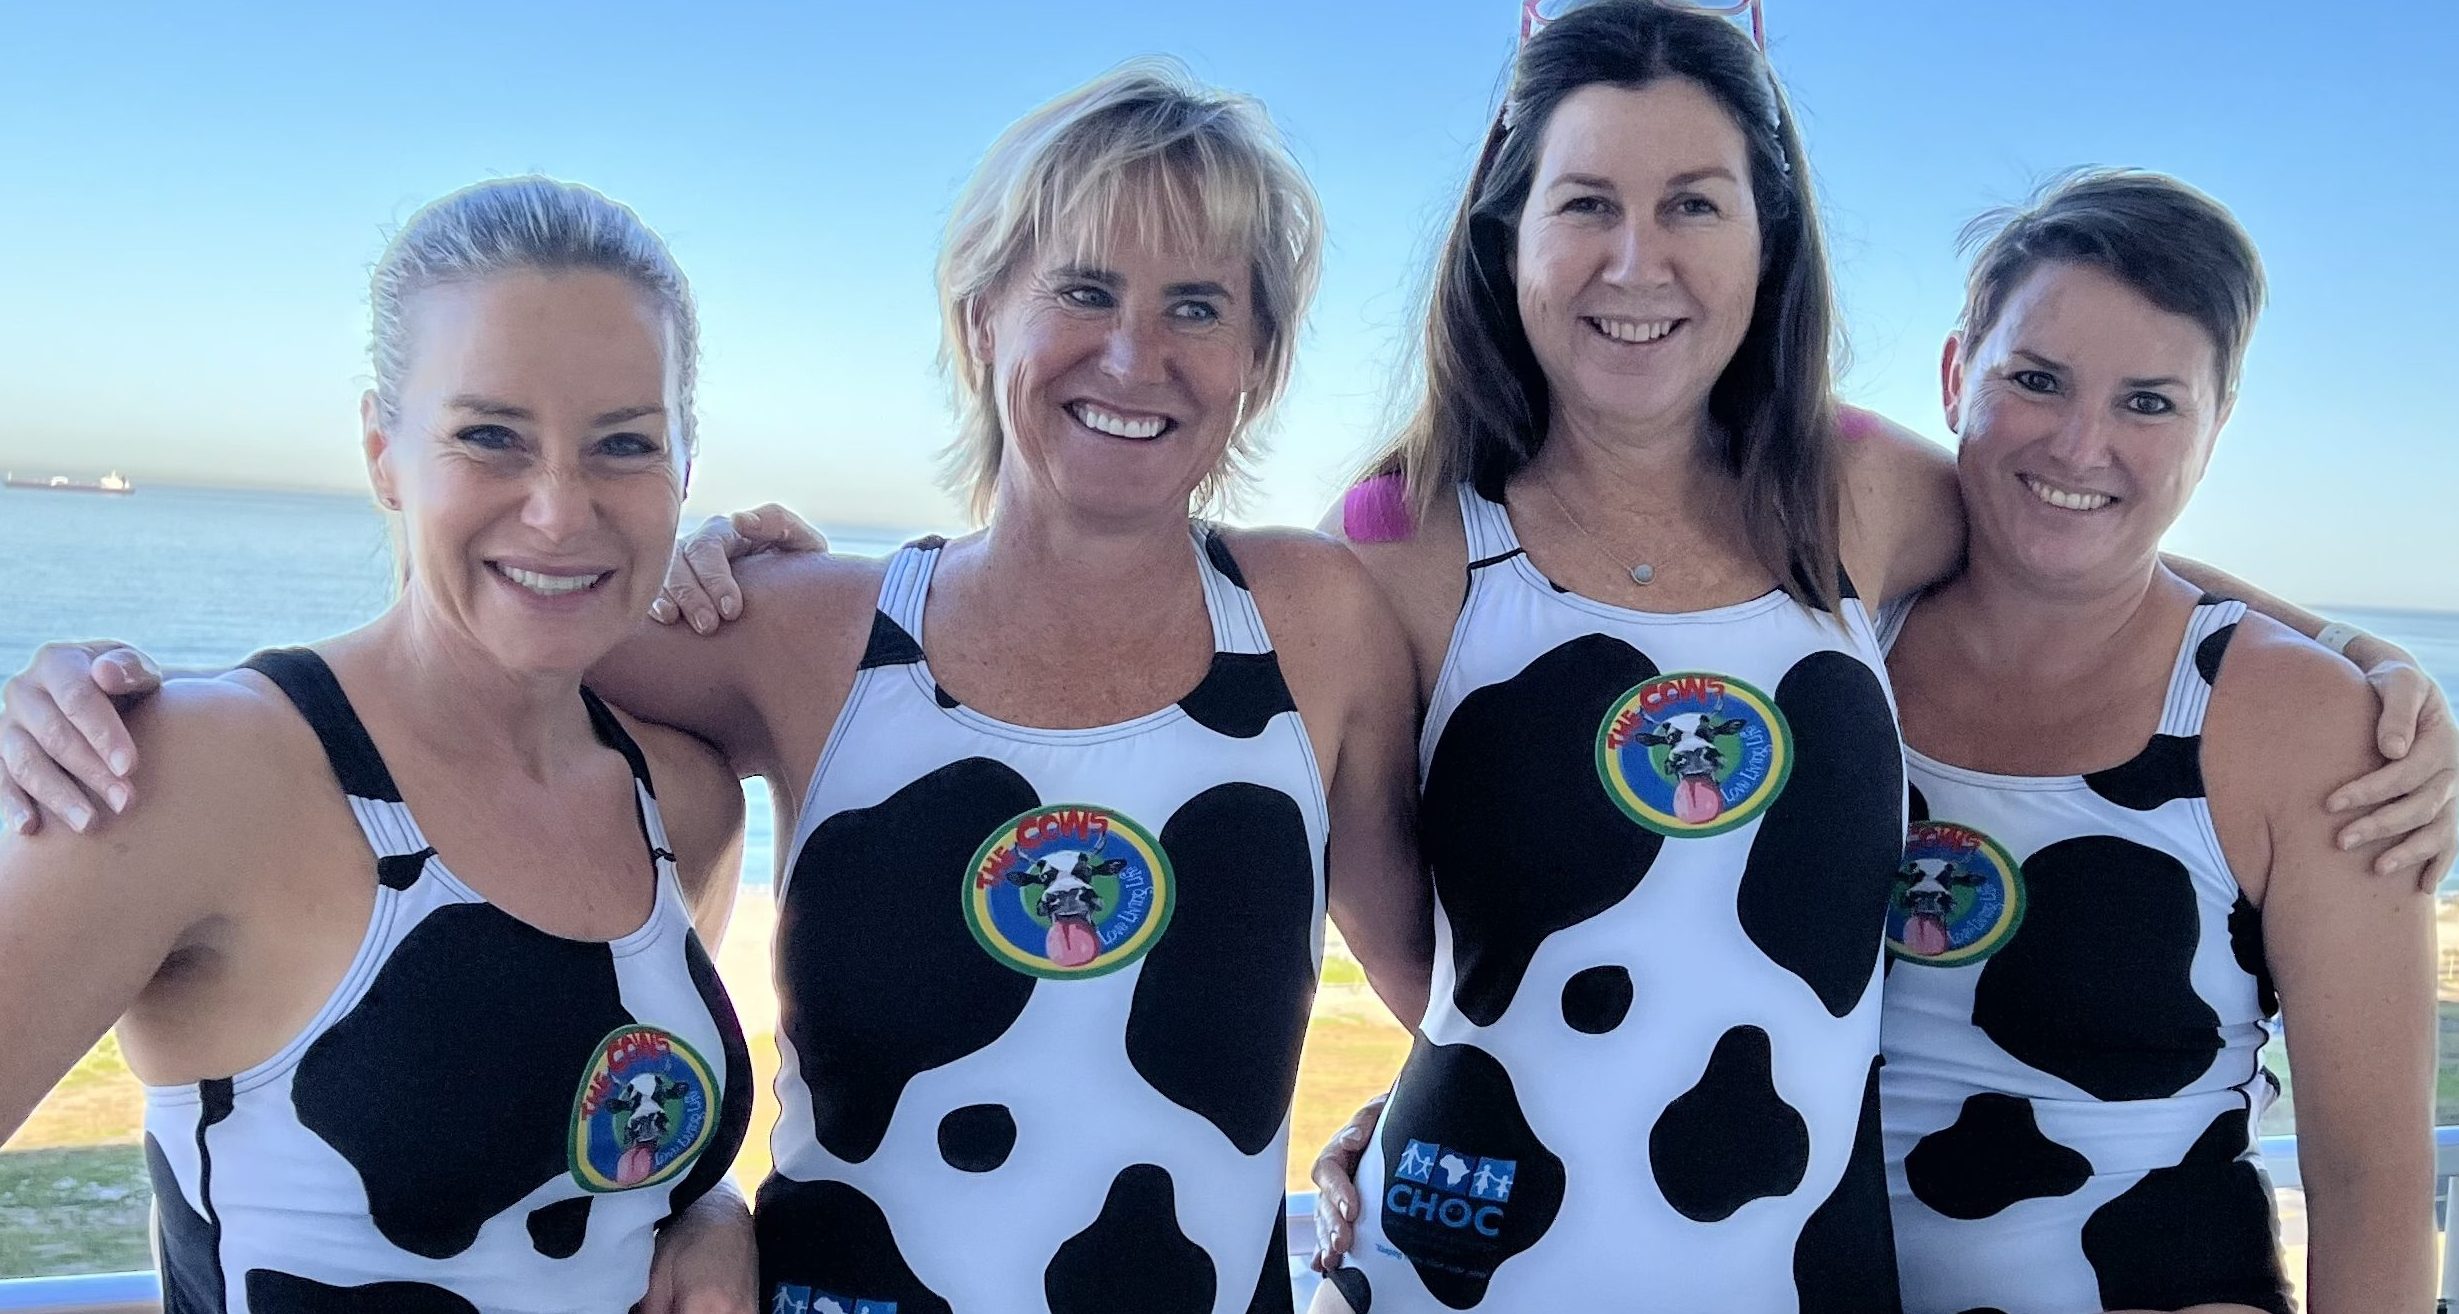 Karen Jankelow, Sue Rider, Michelle Blaauw and Gráinne Formby pose in their matching swimsuits.